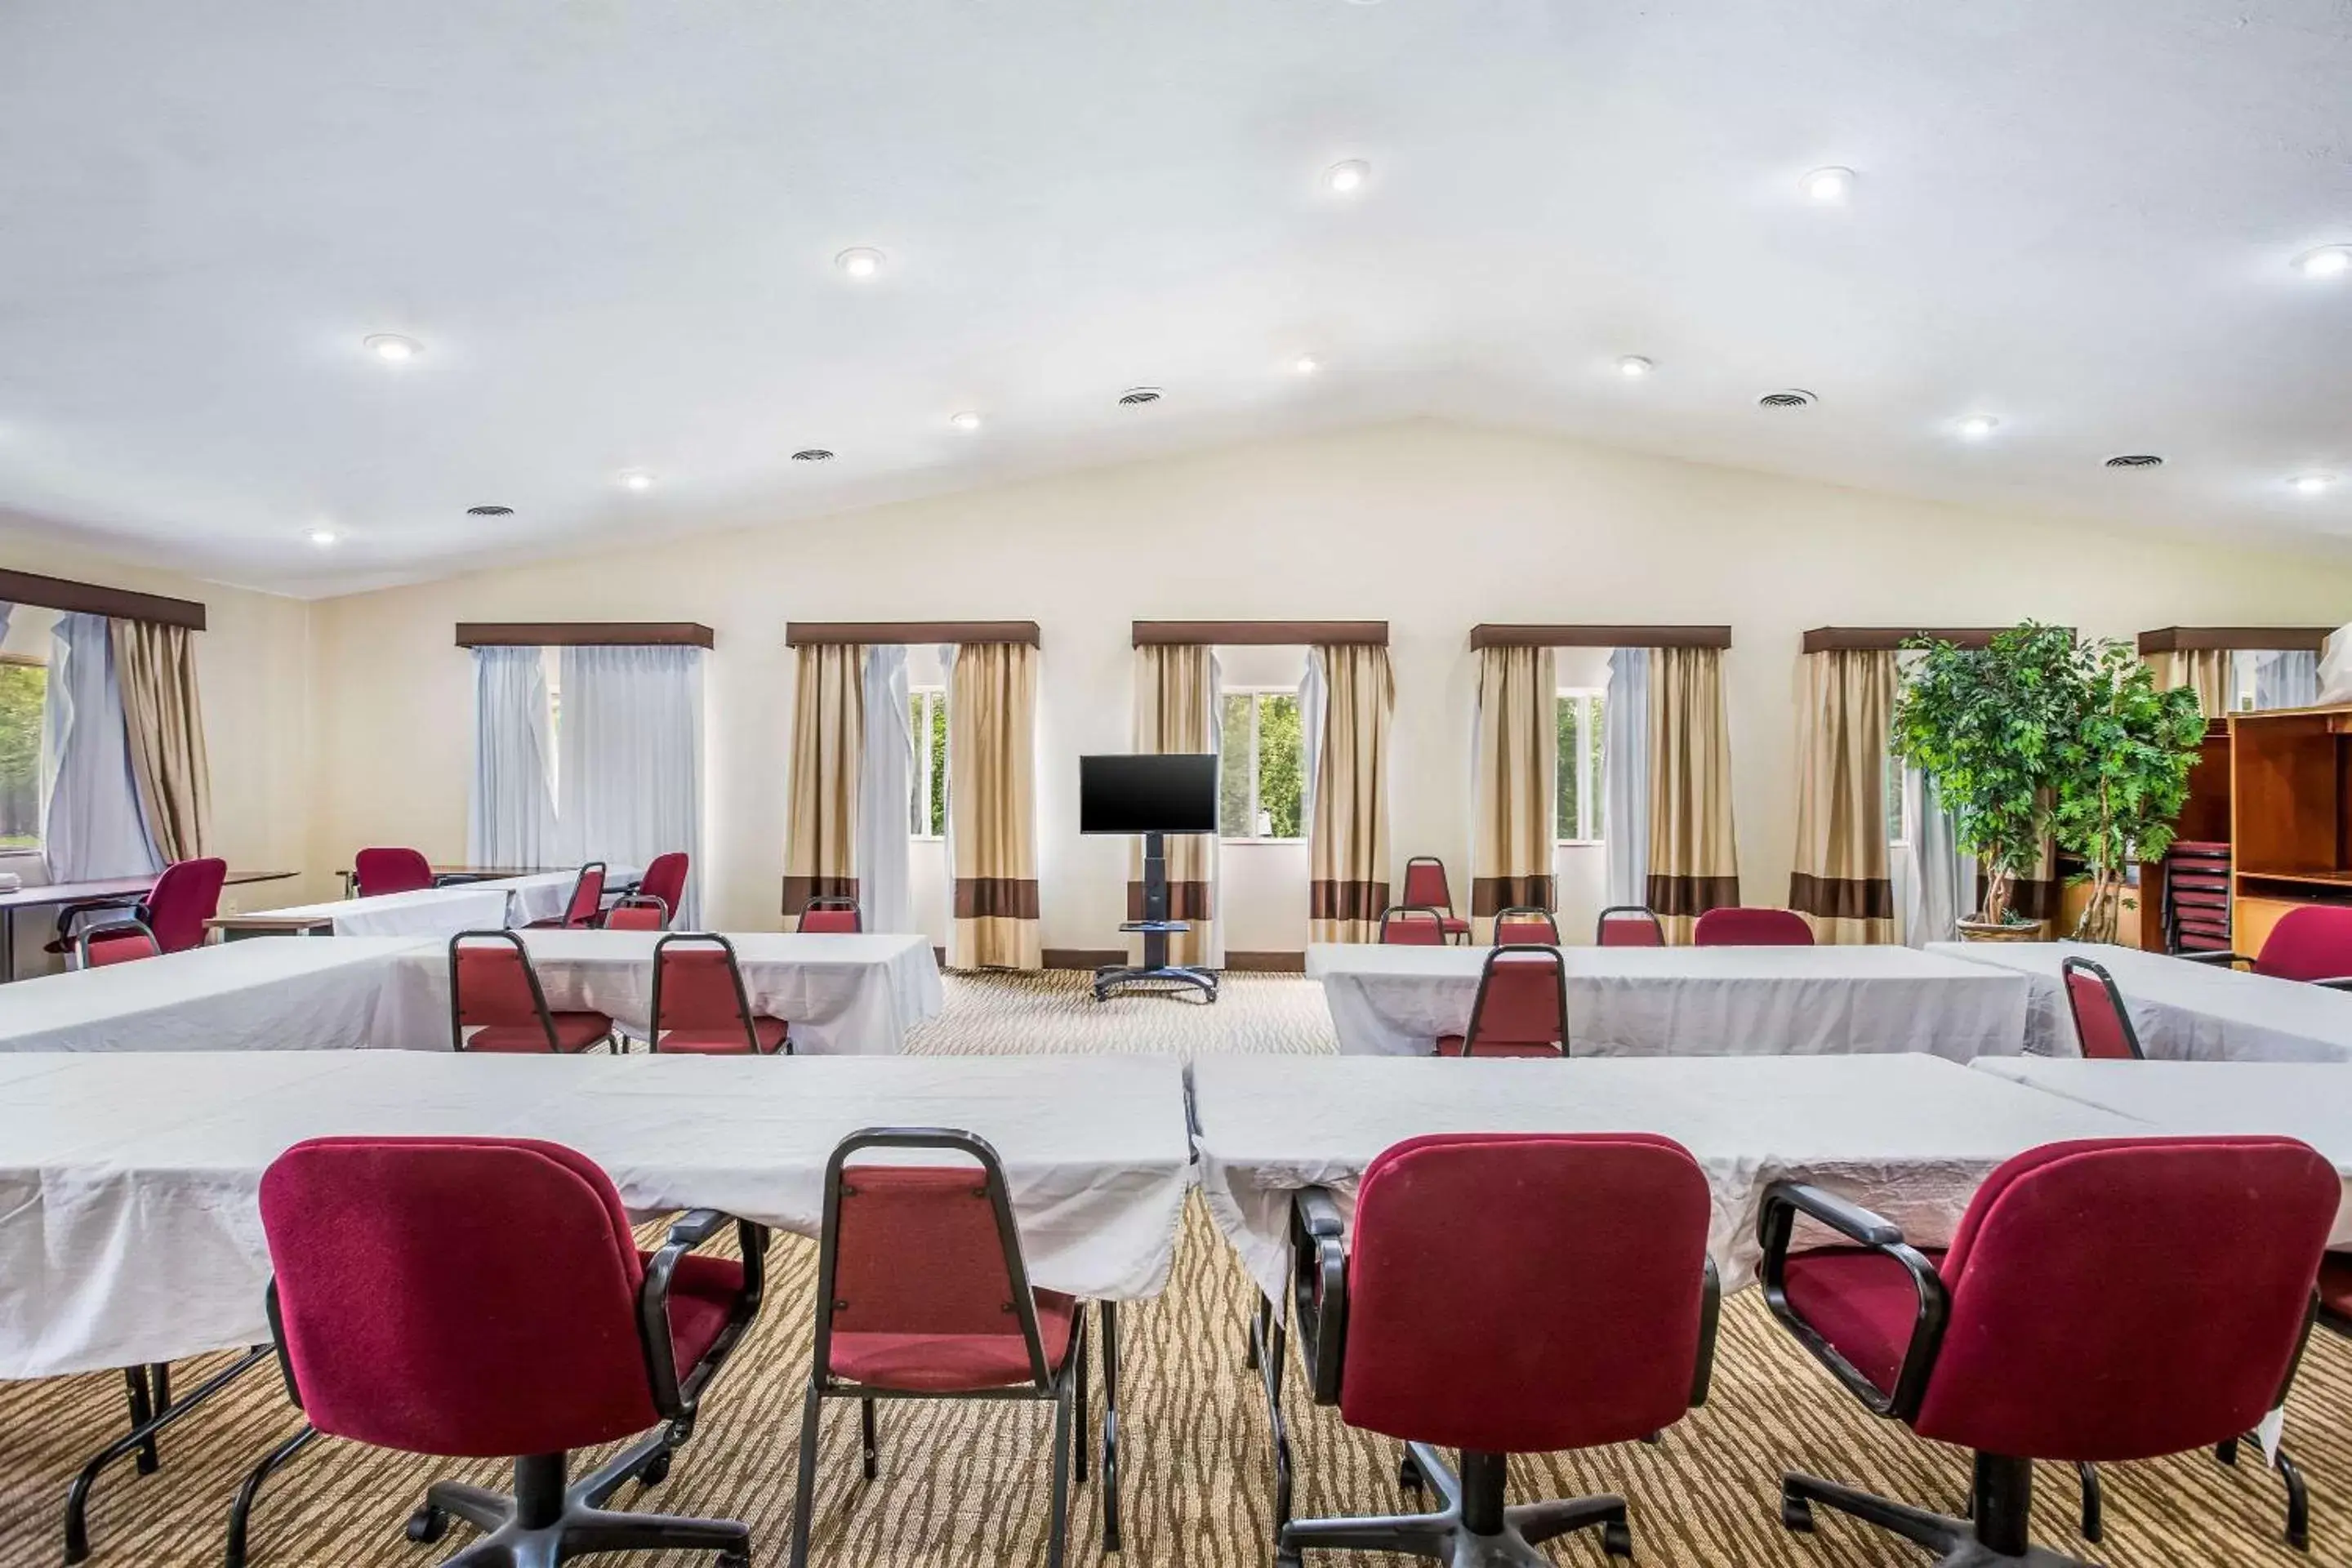 Meeting/conference room in Comfort Inn & Suites Fairborn near Wright Patterson AFB